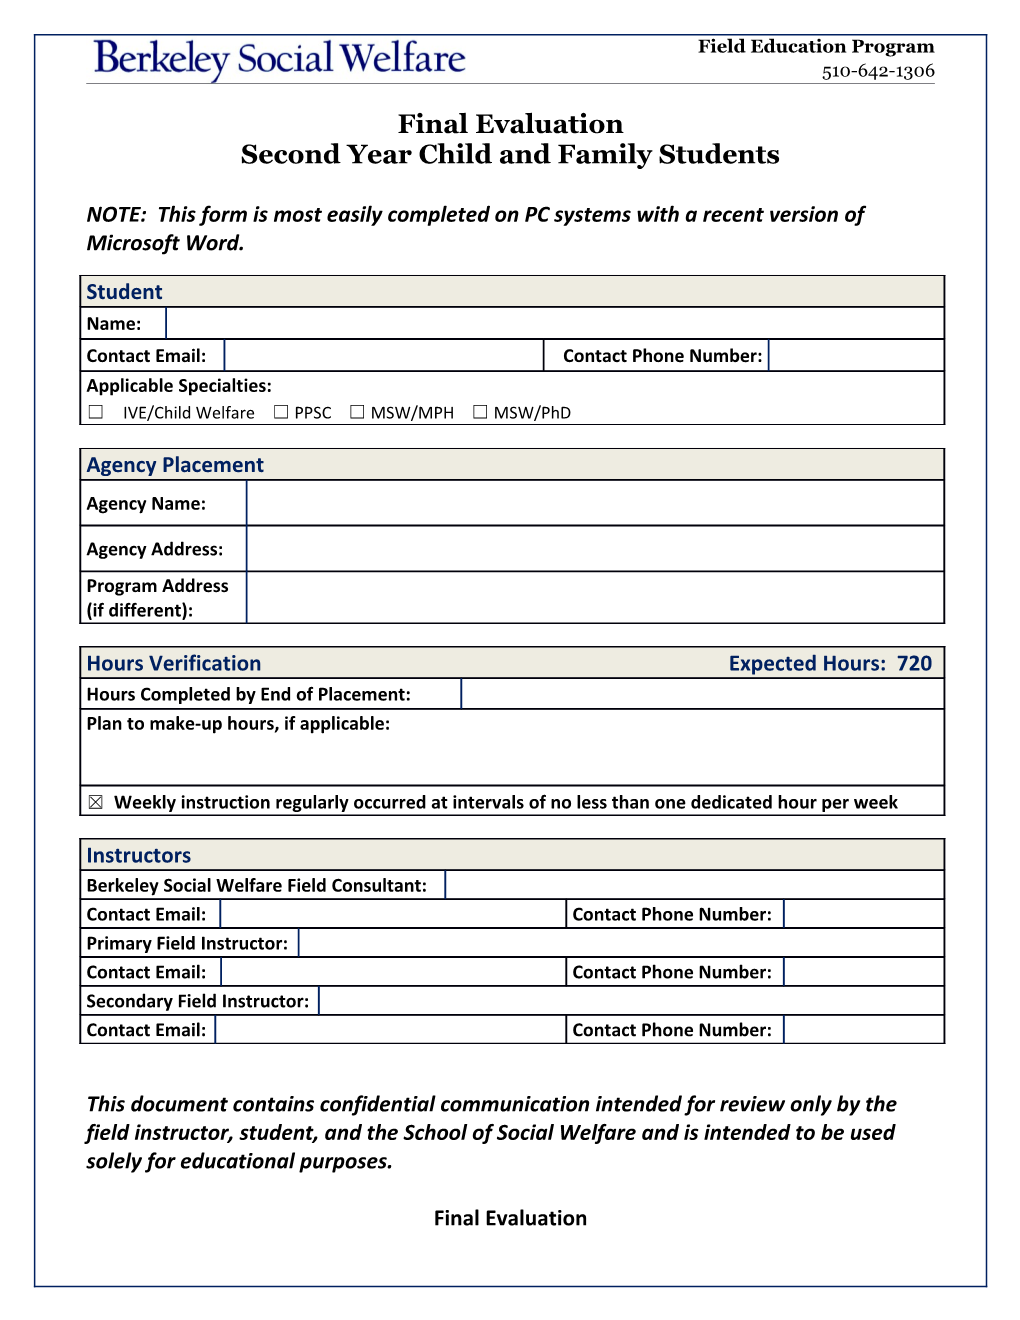 Berkeley Social Welfare Final Evaluation, Advanced Child & Family Page 15